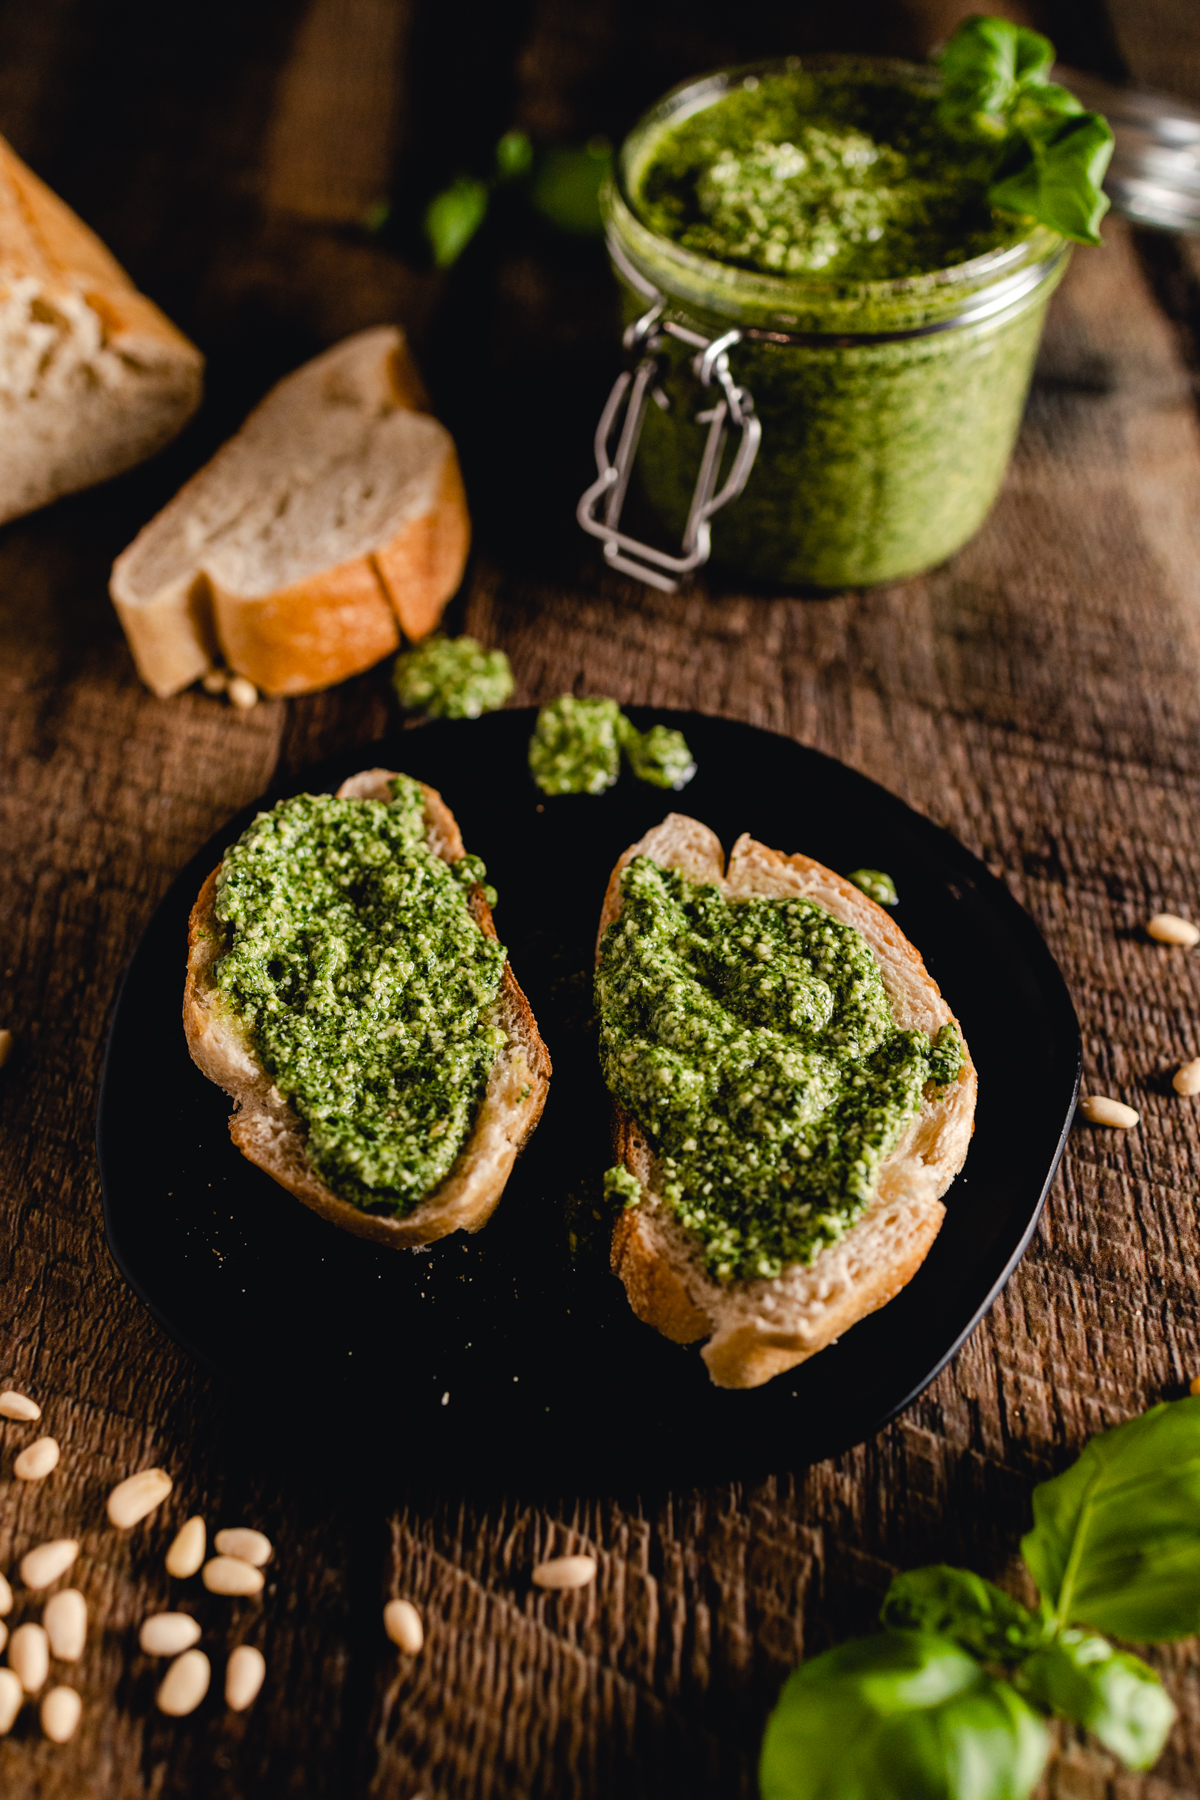 Pesto pesto on toasted bread with a jar of pesto on a wooden table.